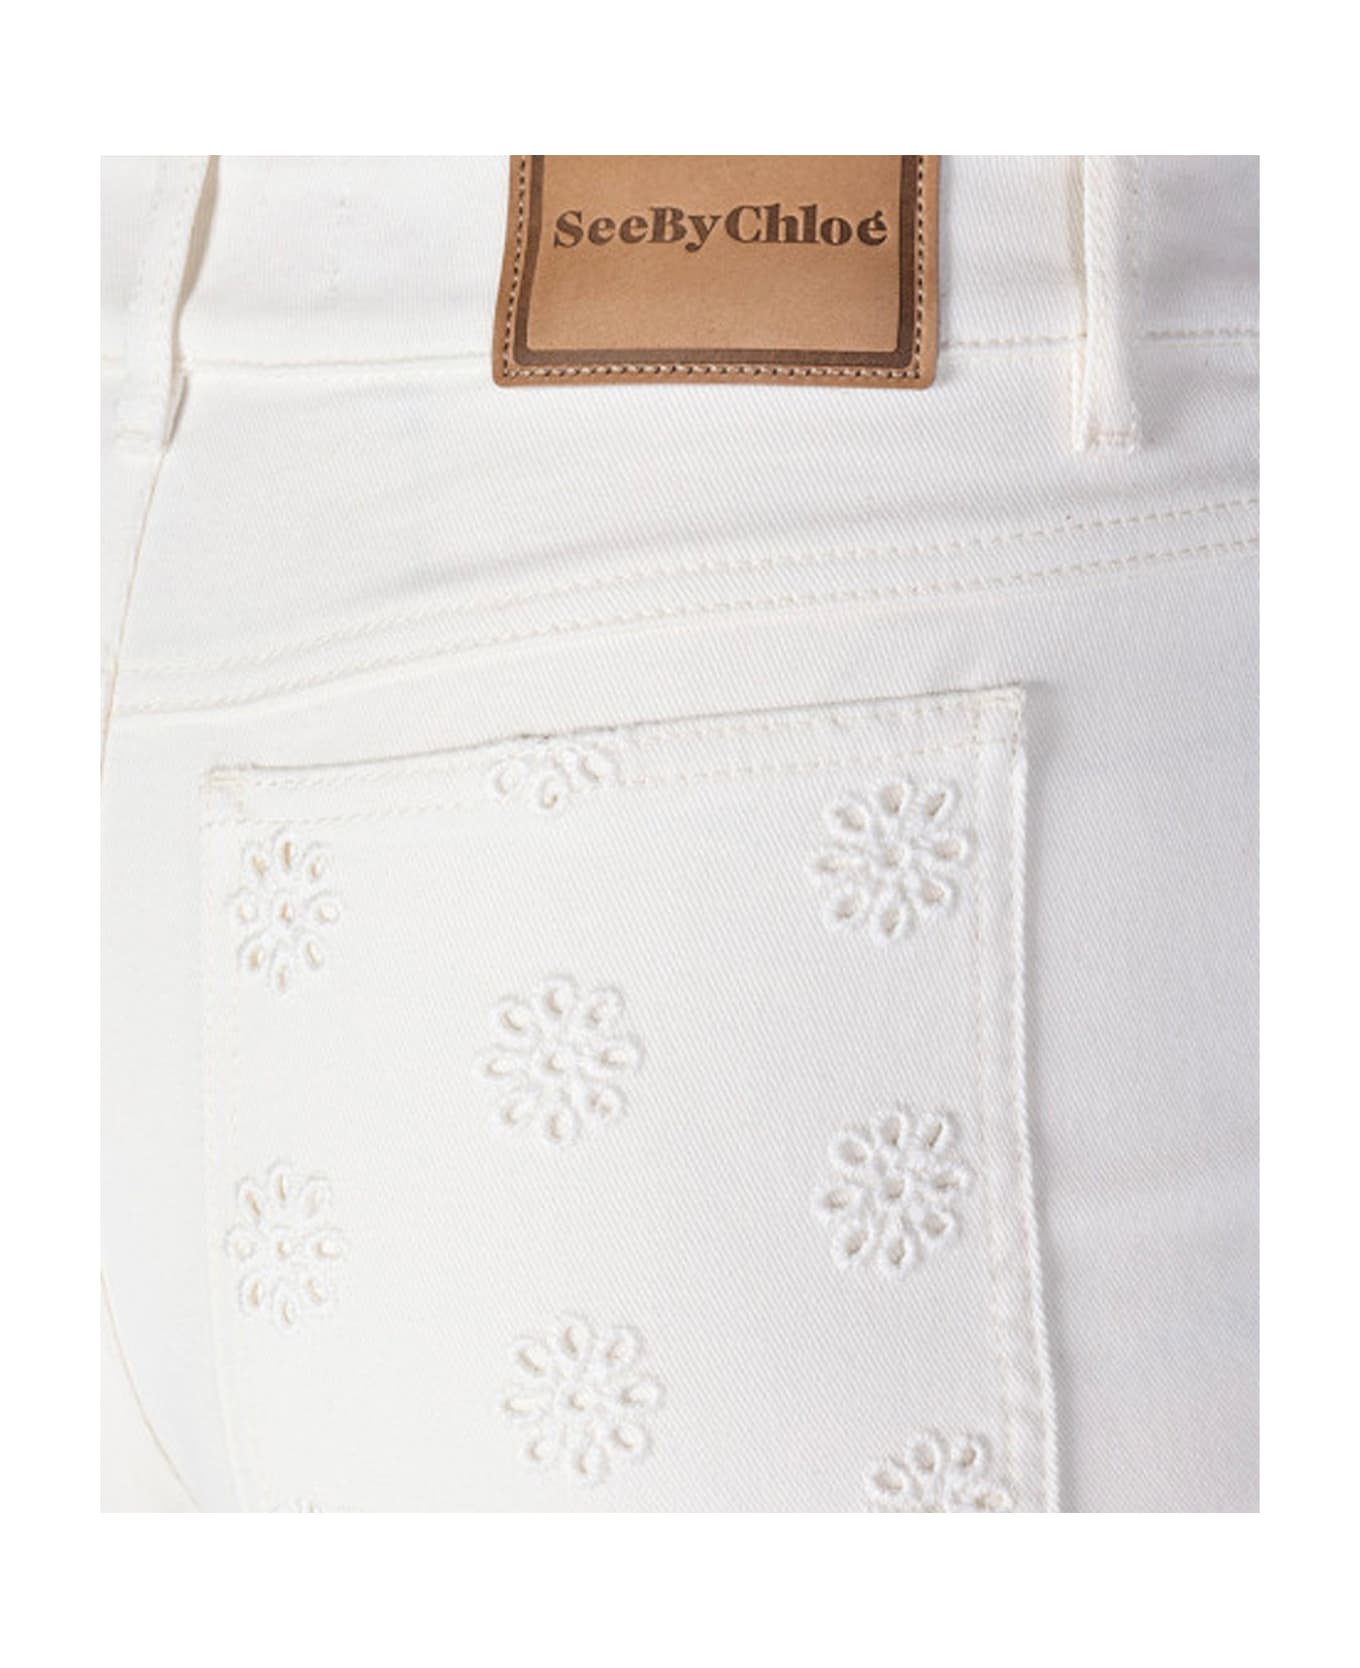 See by Chloé Denim Jeans - White ボトムス